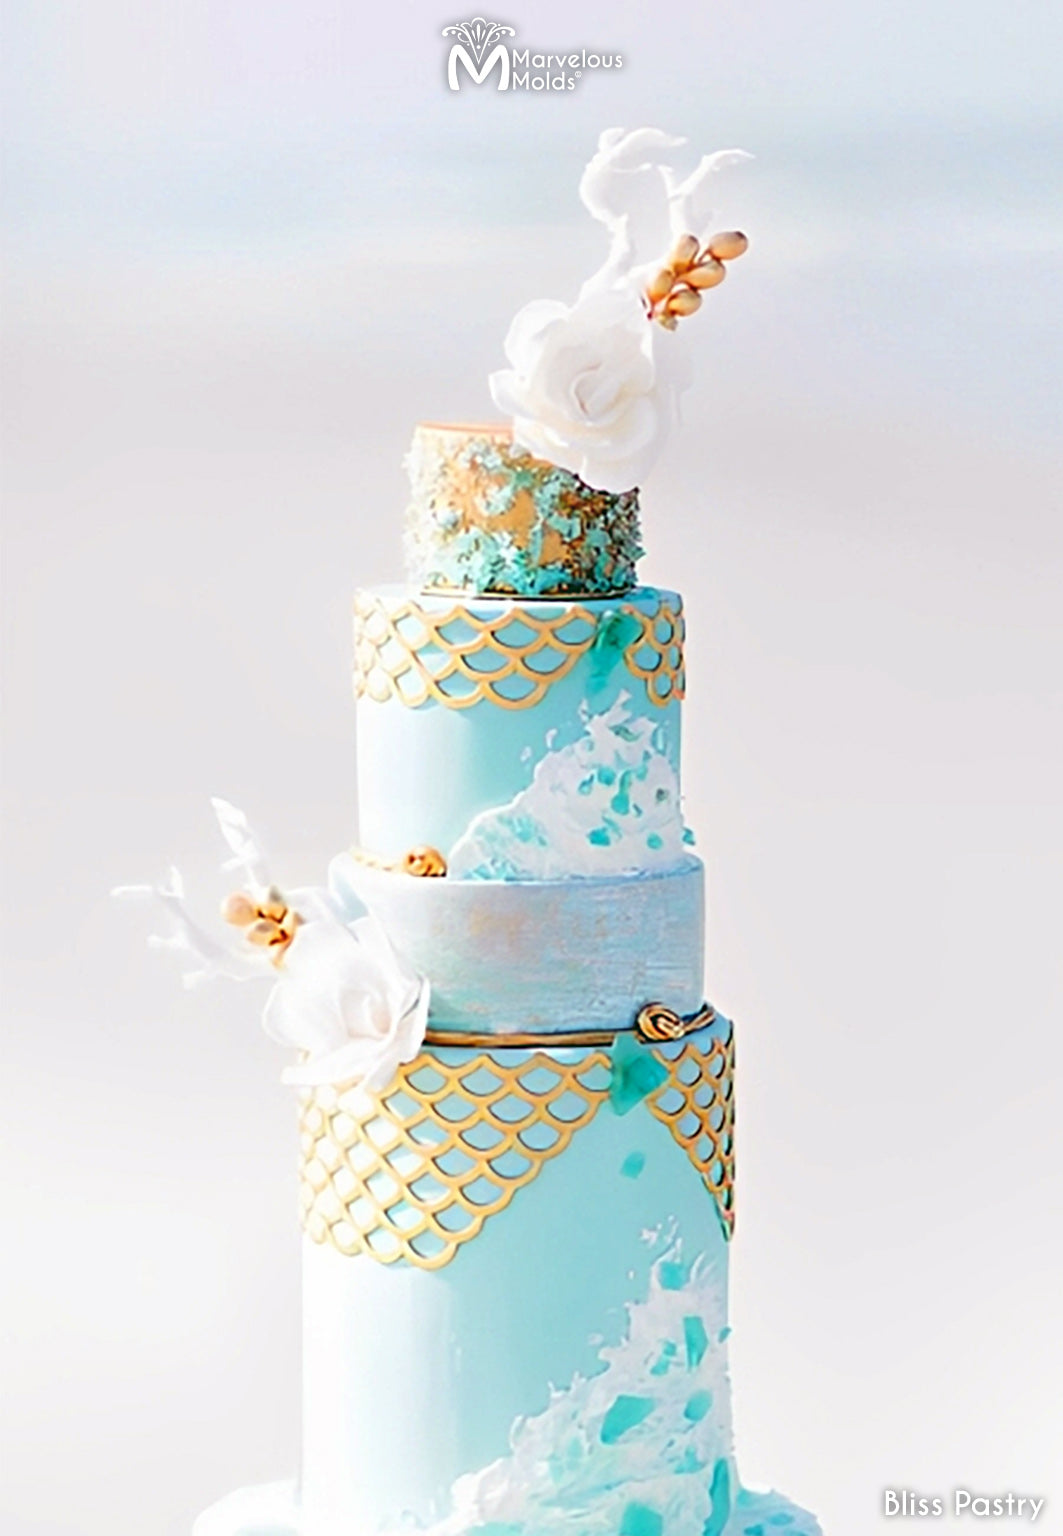 Nautical Themed Beach Wedding Cake Decorated Using the Marvelous Molds Scalloped Lattice Silicone Onlay Cake Stencil